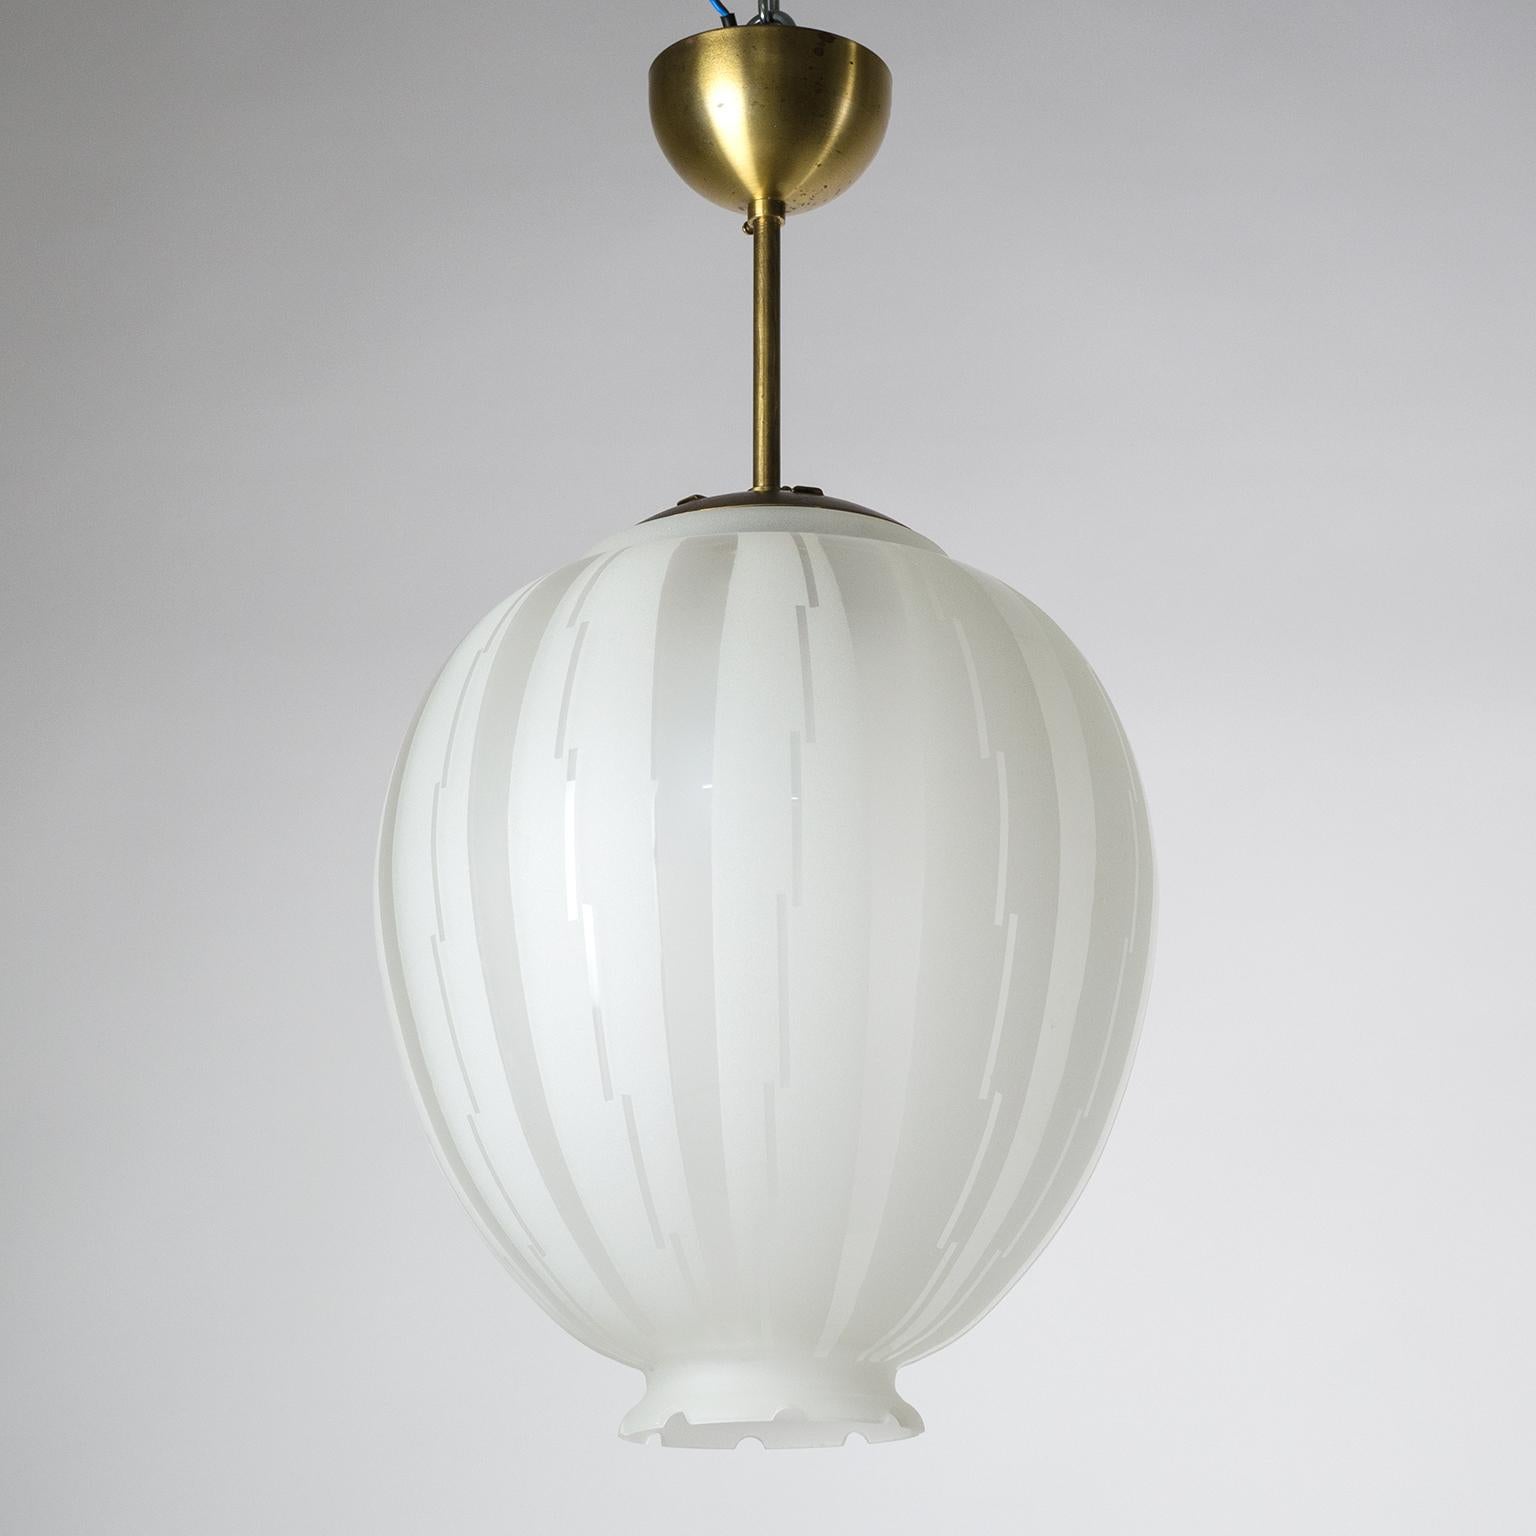 Rare Art Deco glass and brass pendant, Sweden 1930s. The balloon shaped glass body has a satin finish on the inside and is partially satinated on the outside in a pattern of stripes and geometric lines with a lovely contrast of matte and glossy